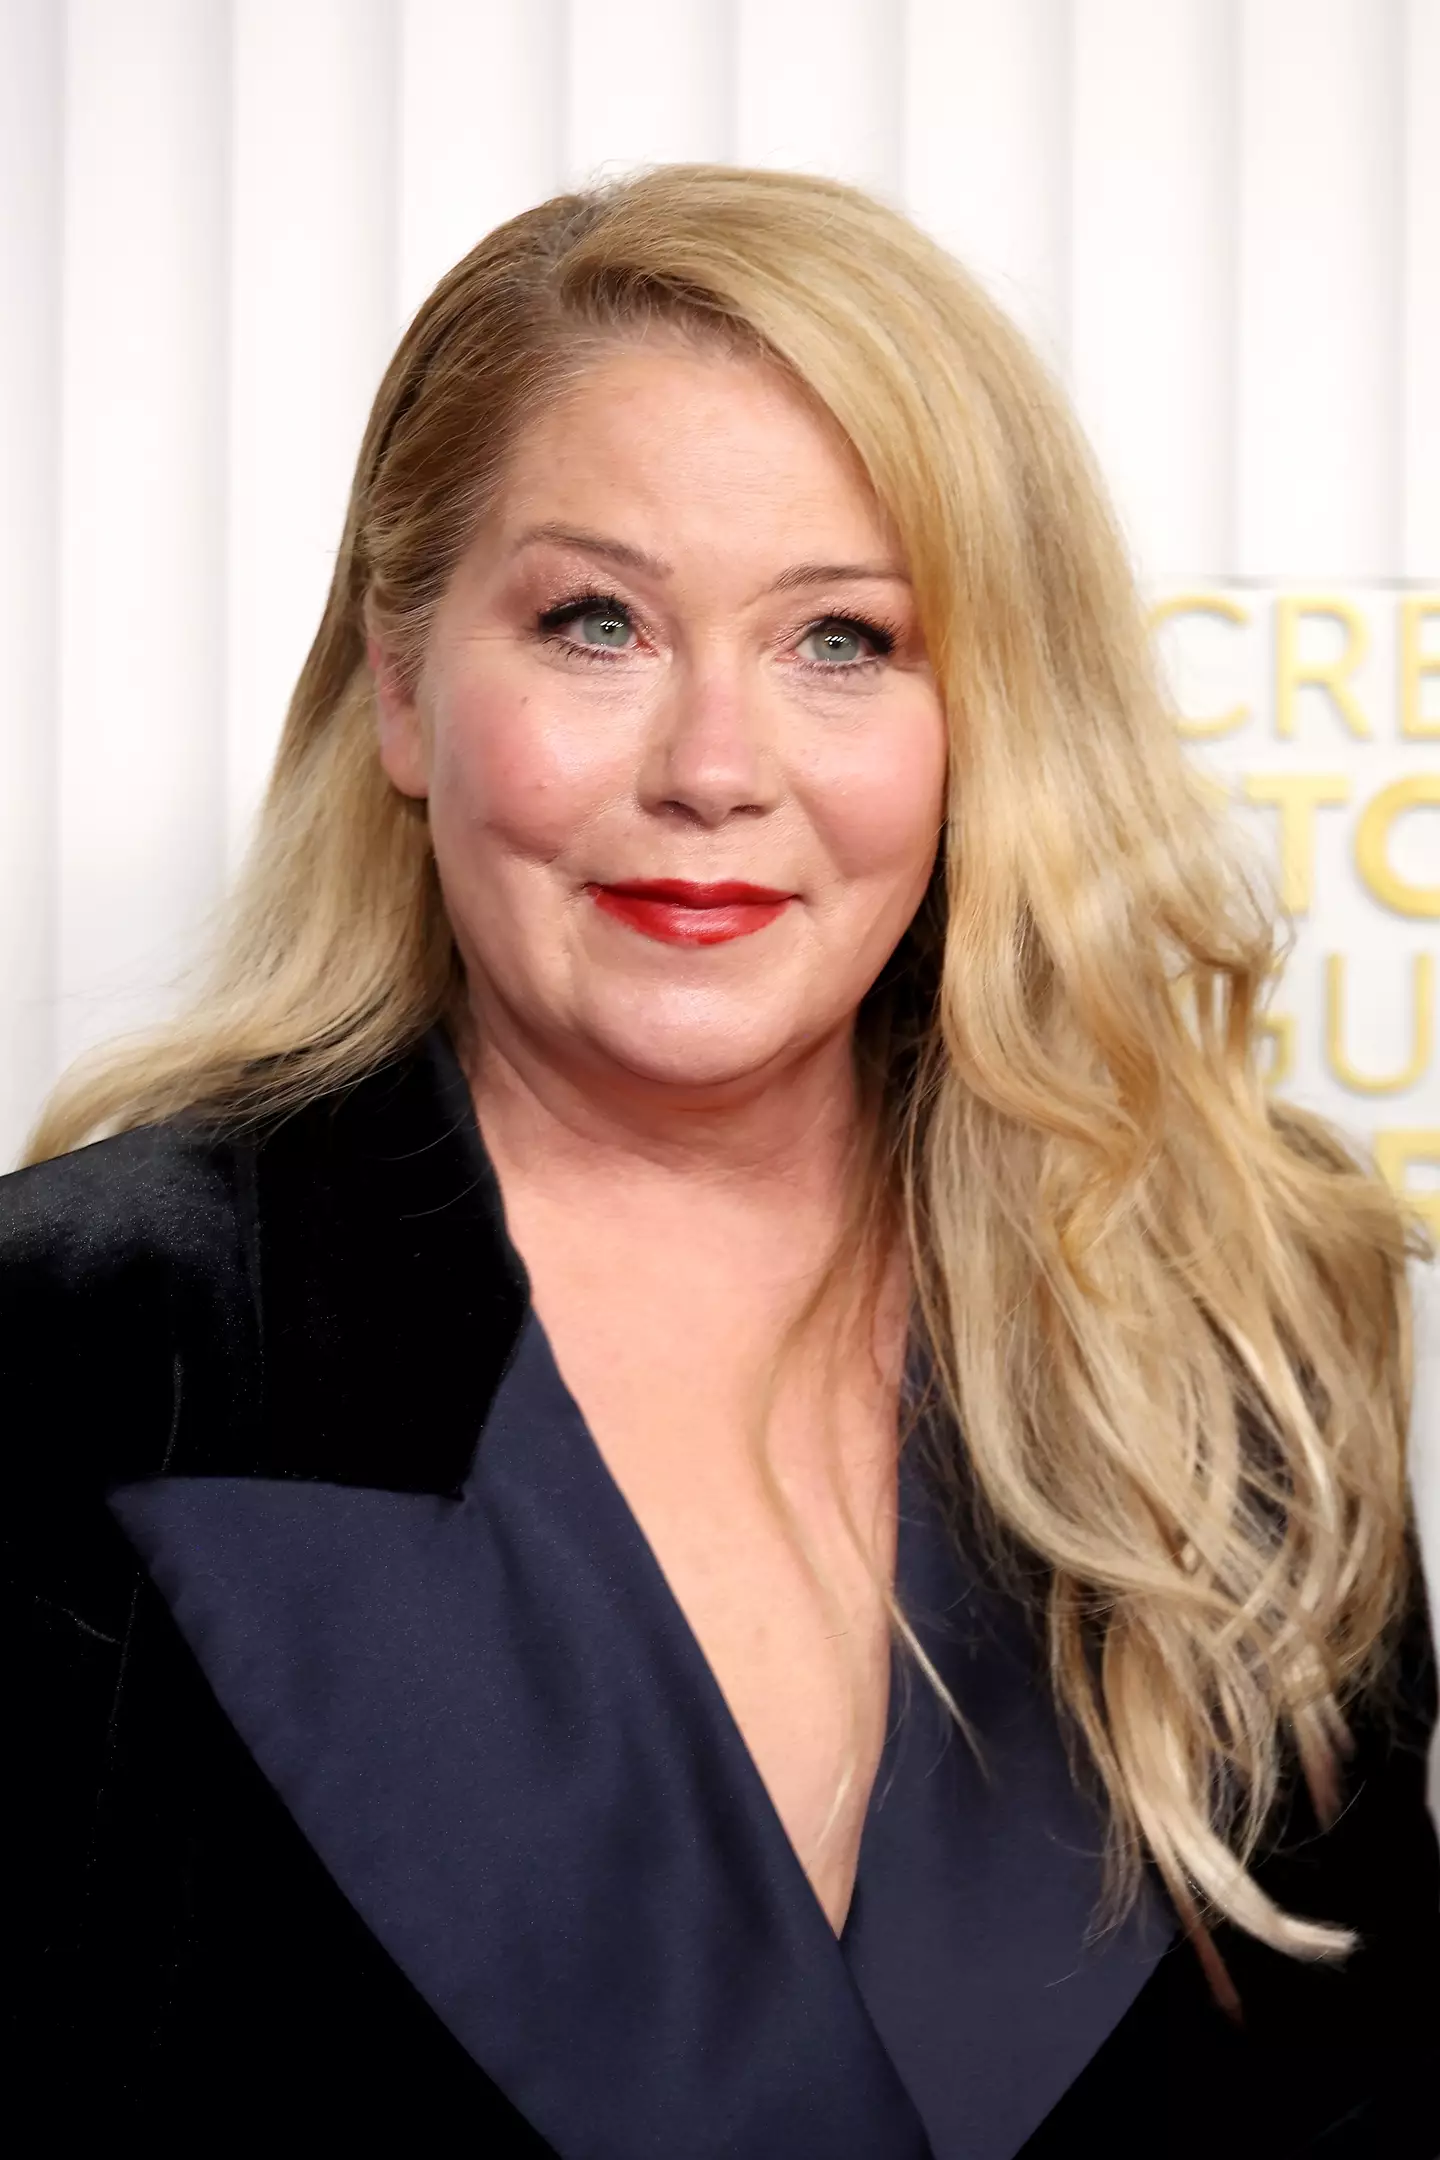 Christina Applegate's speech at this year's Emmy Awards has sparked an important conversation around the health condition.